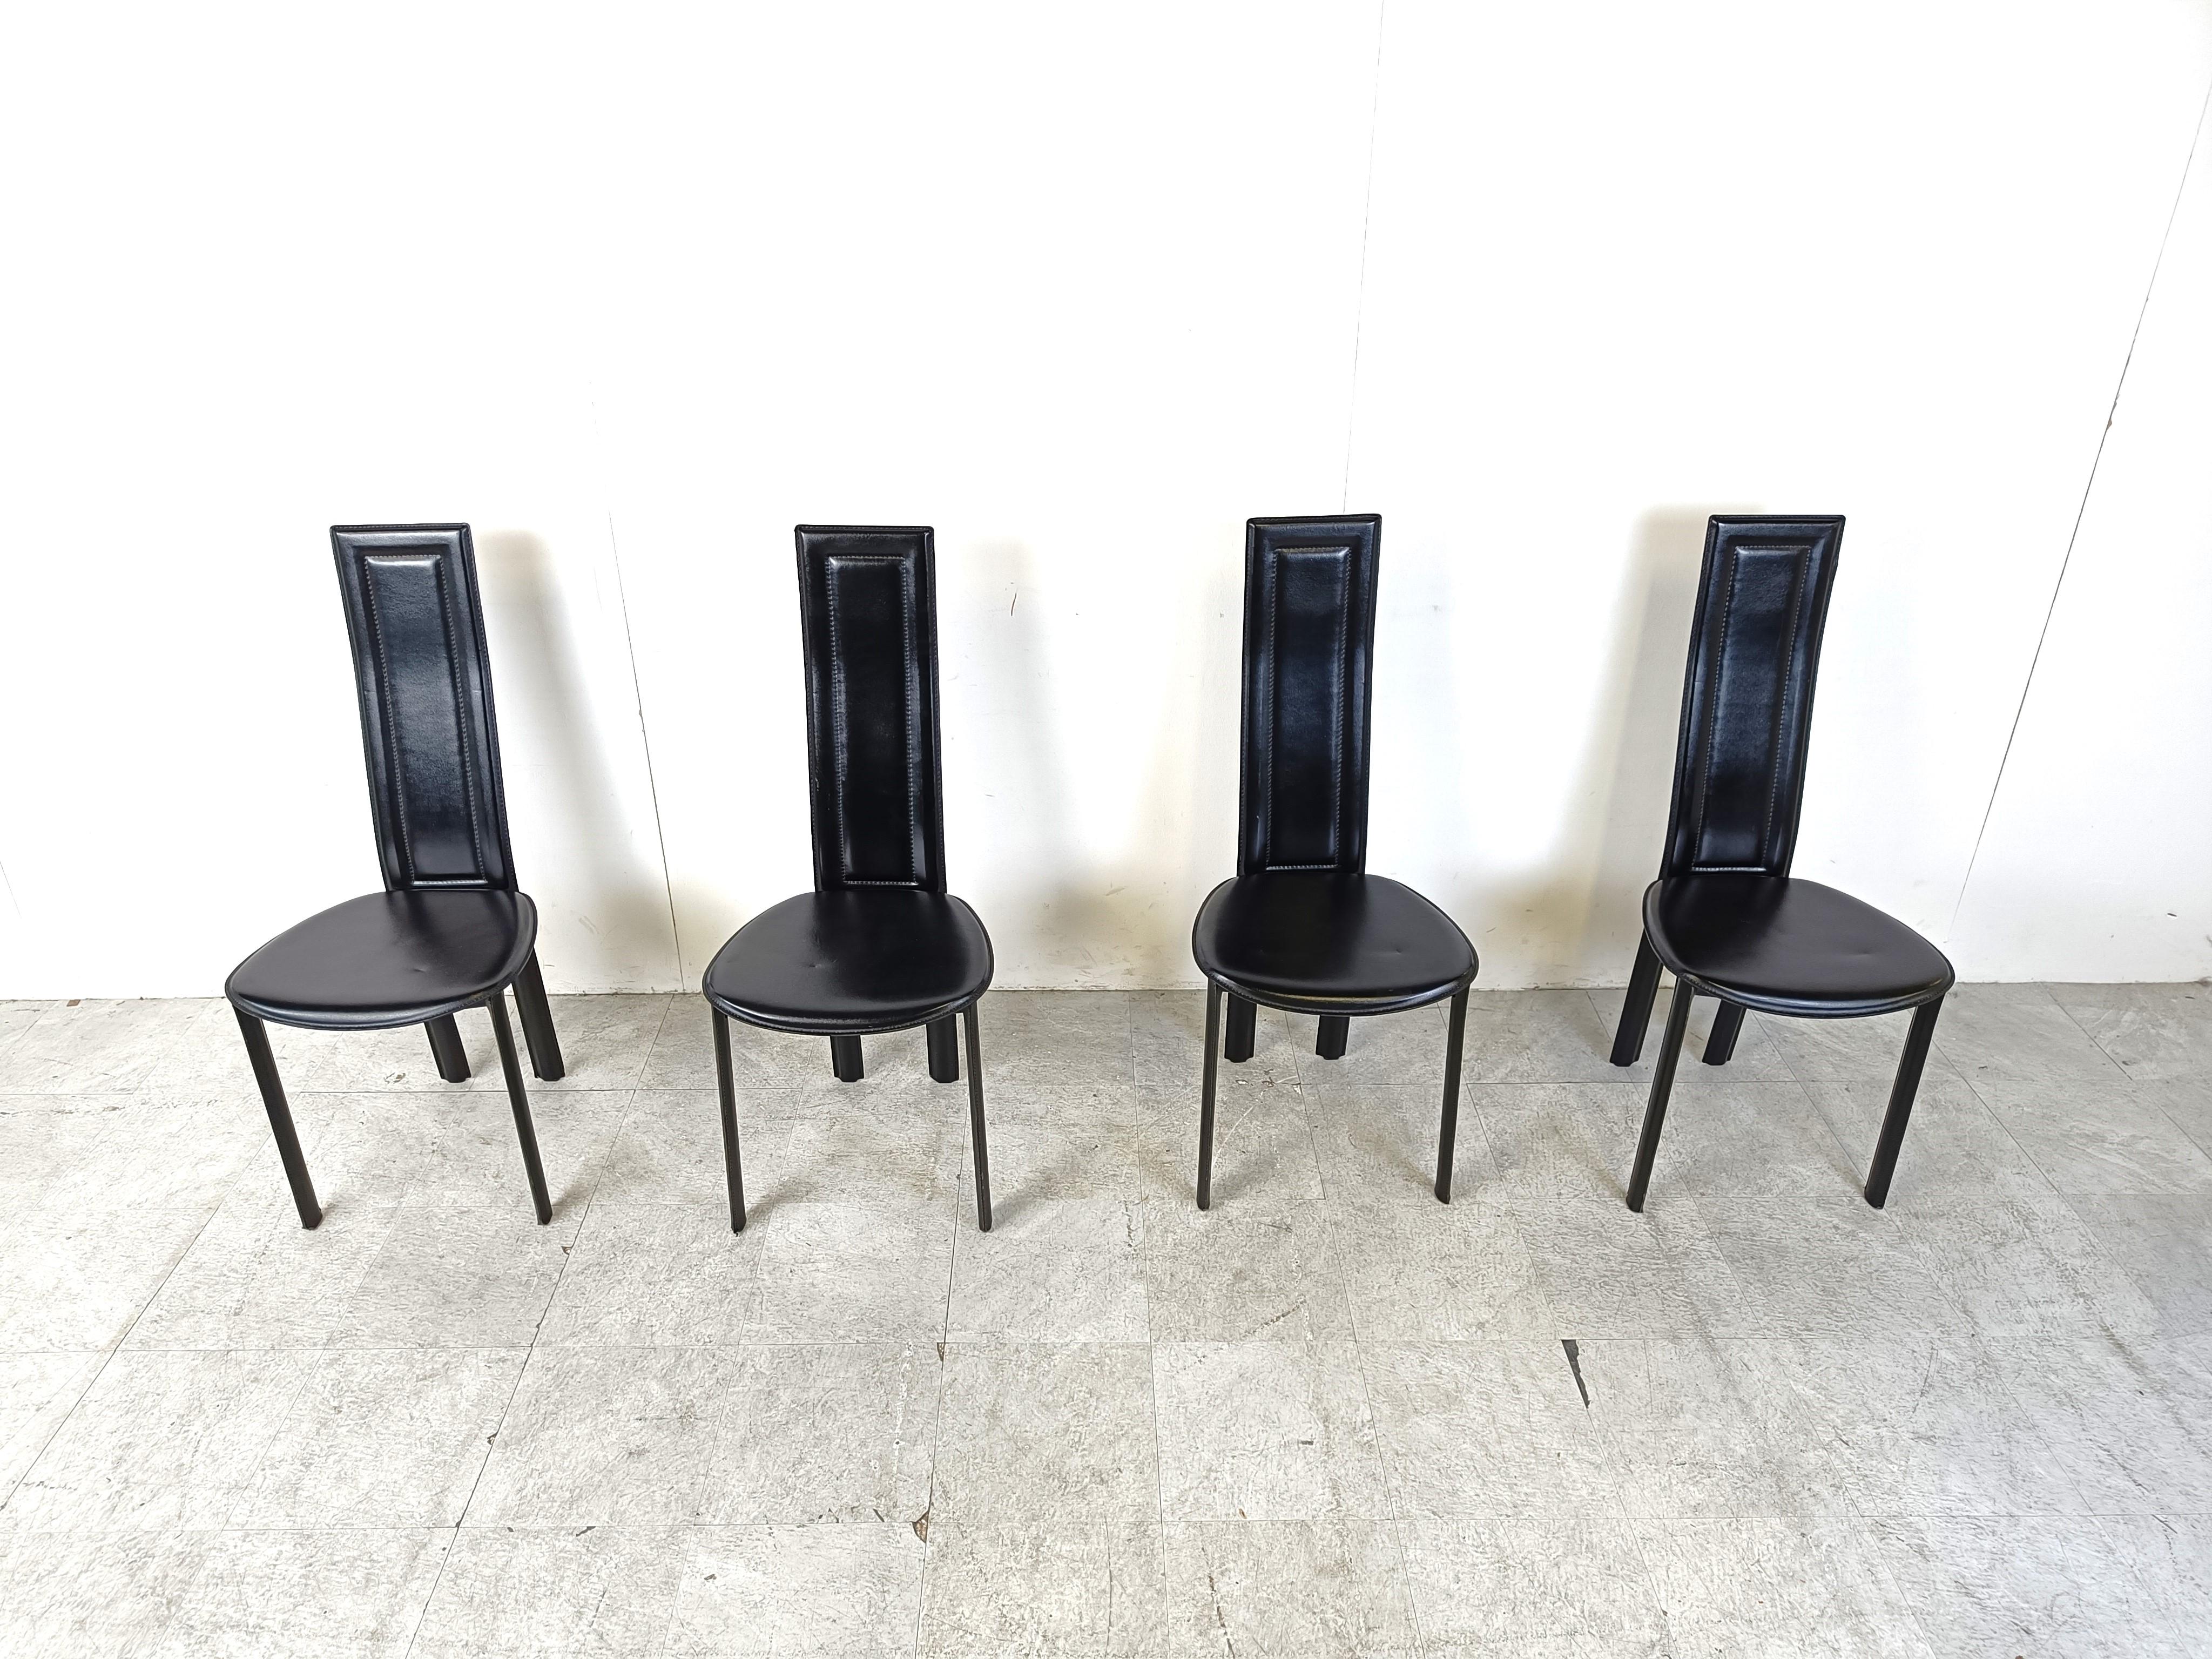 Set of 4 black italian leather high back dining chairs.

beautiful sleek and timeless design.

The chairs are in good condition with minimal wear.

1980s - Italy

Dimensions
height: 105cm/41.33